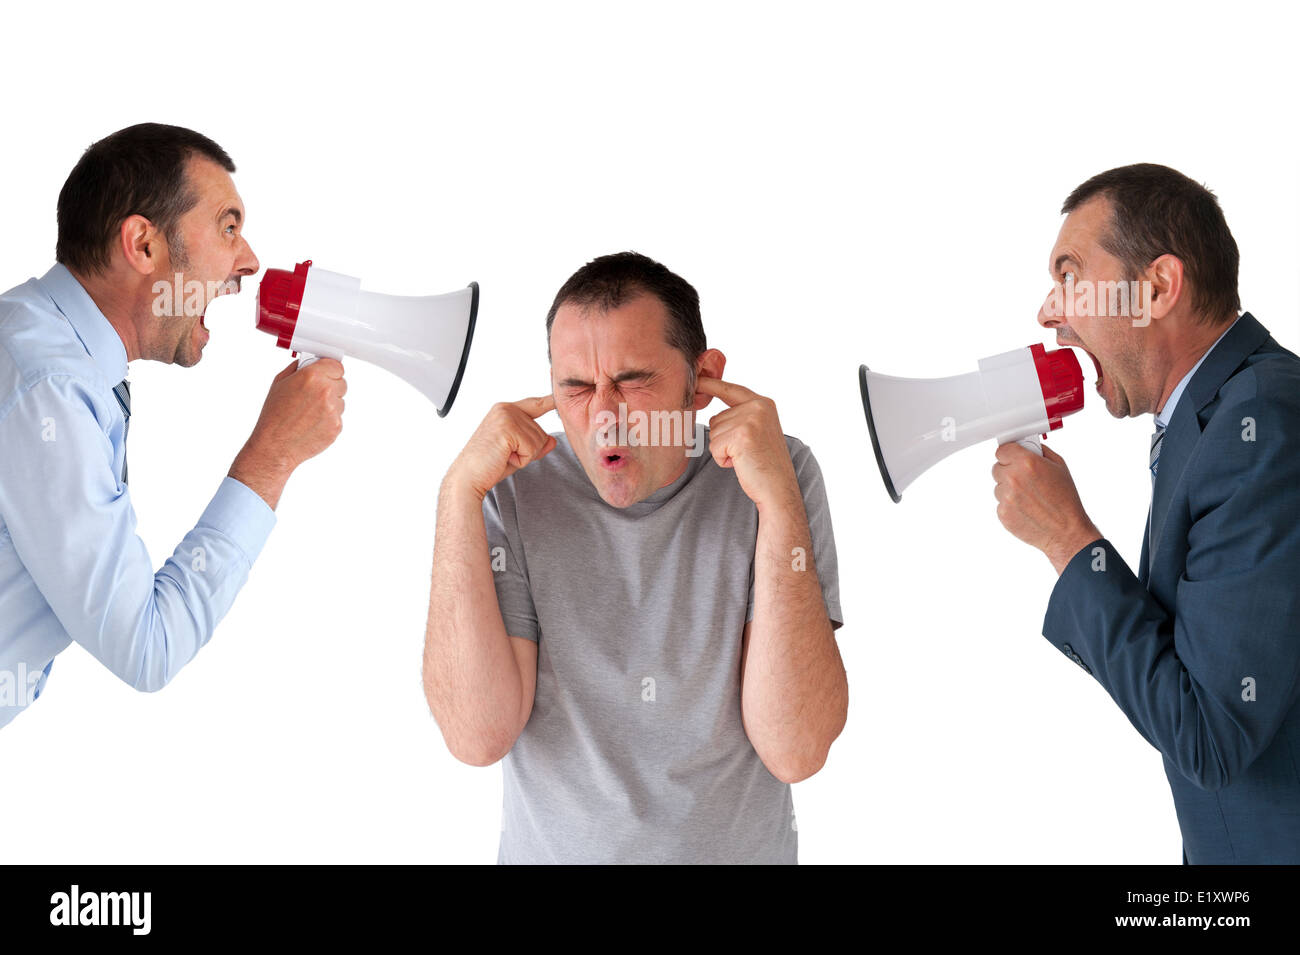 man being yelled at and bullied by managers isolated on white Stock Photo